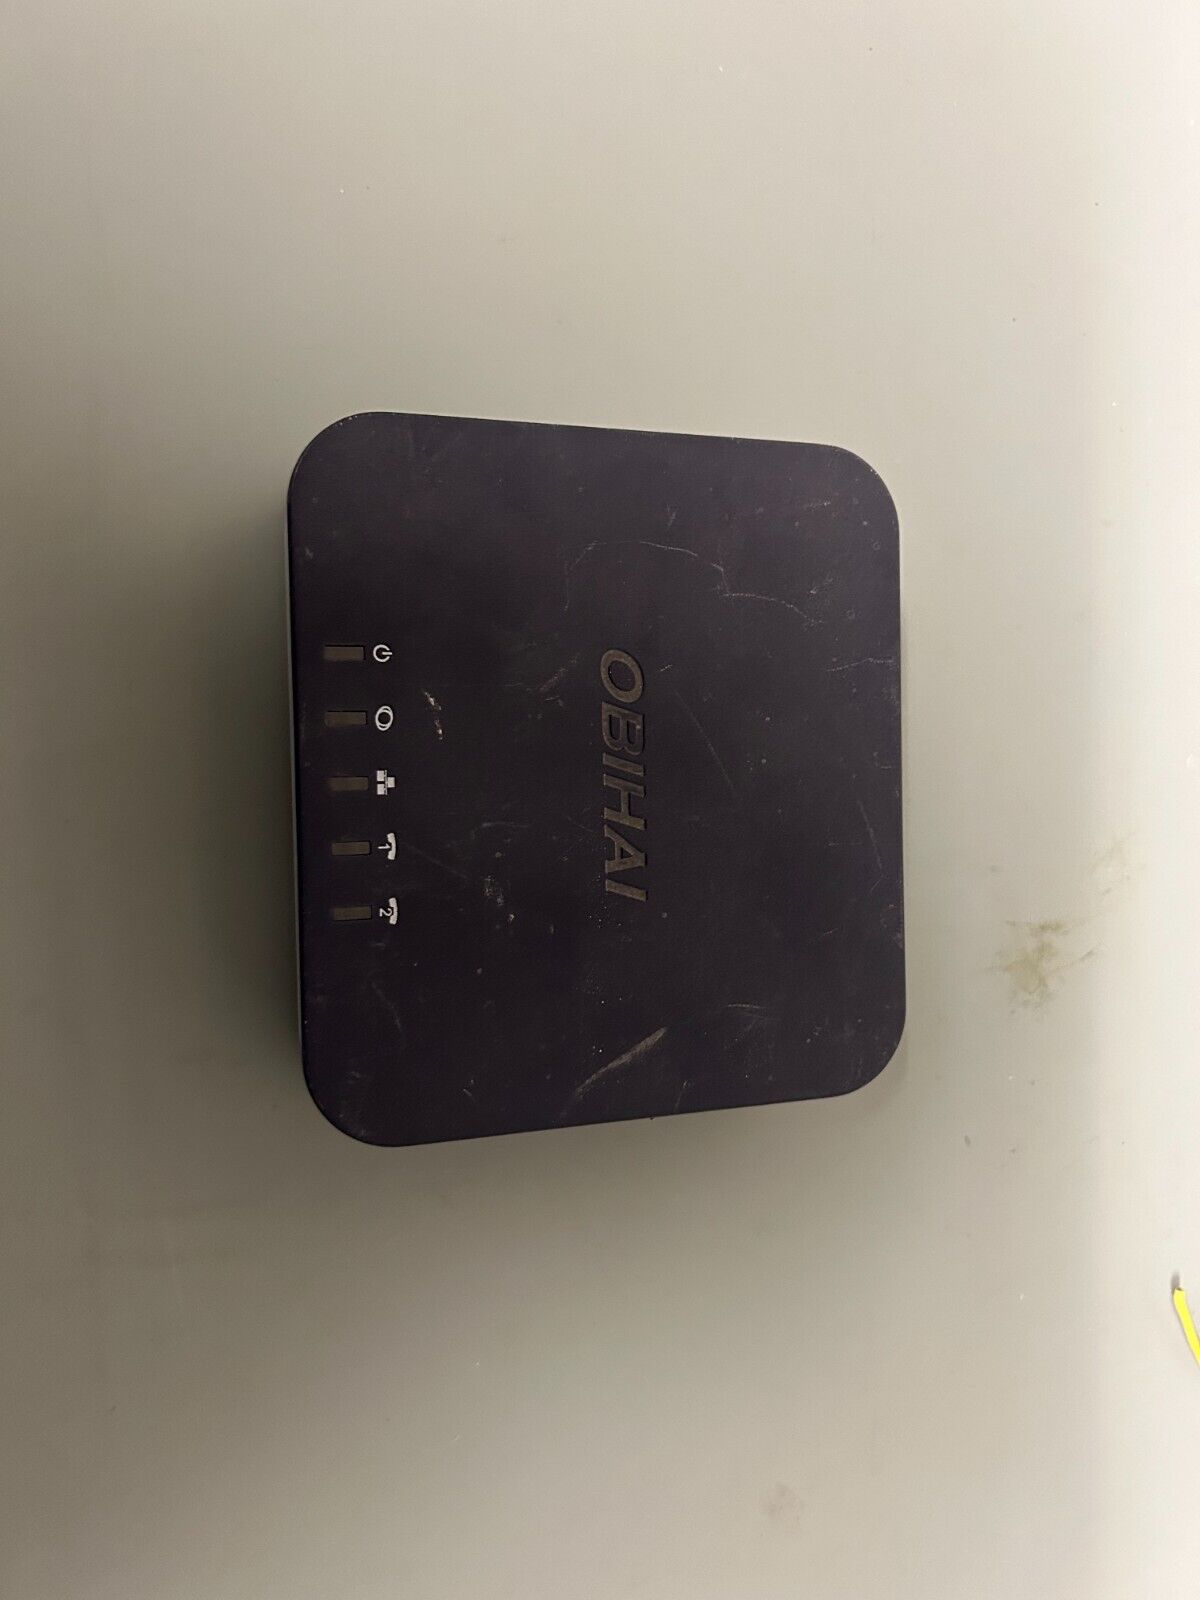 USED Obihai OBi302 2-Port VoIP Phone Adapter with Router